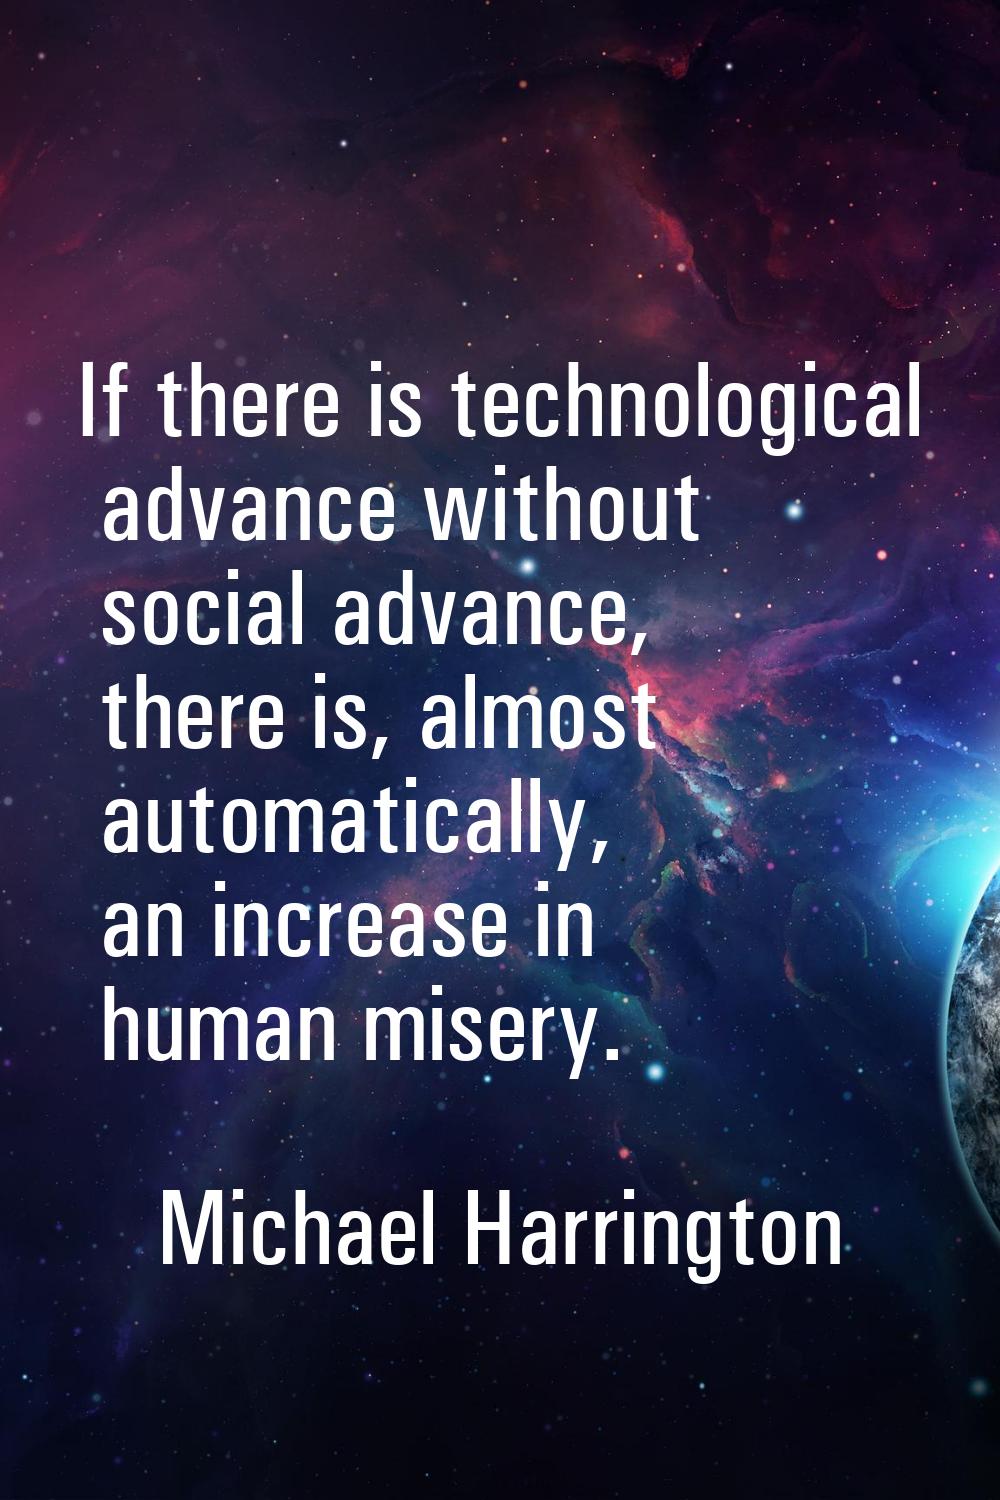 If there is technological advance without social advance, there is, almost automatically, an increa